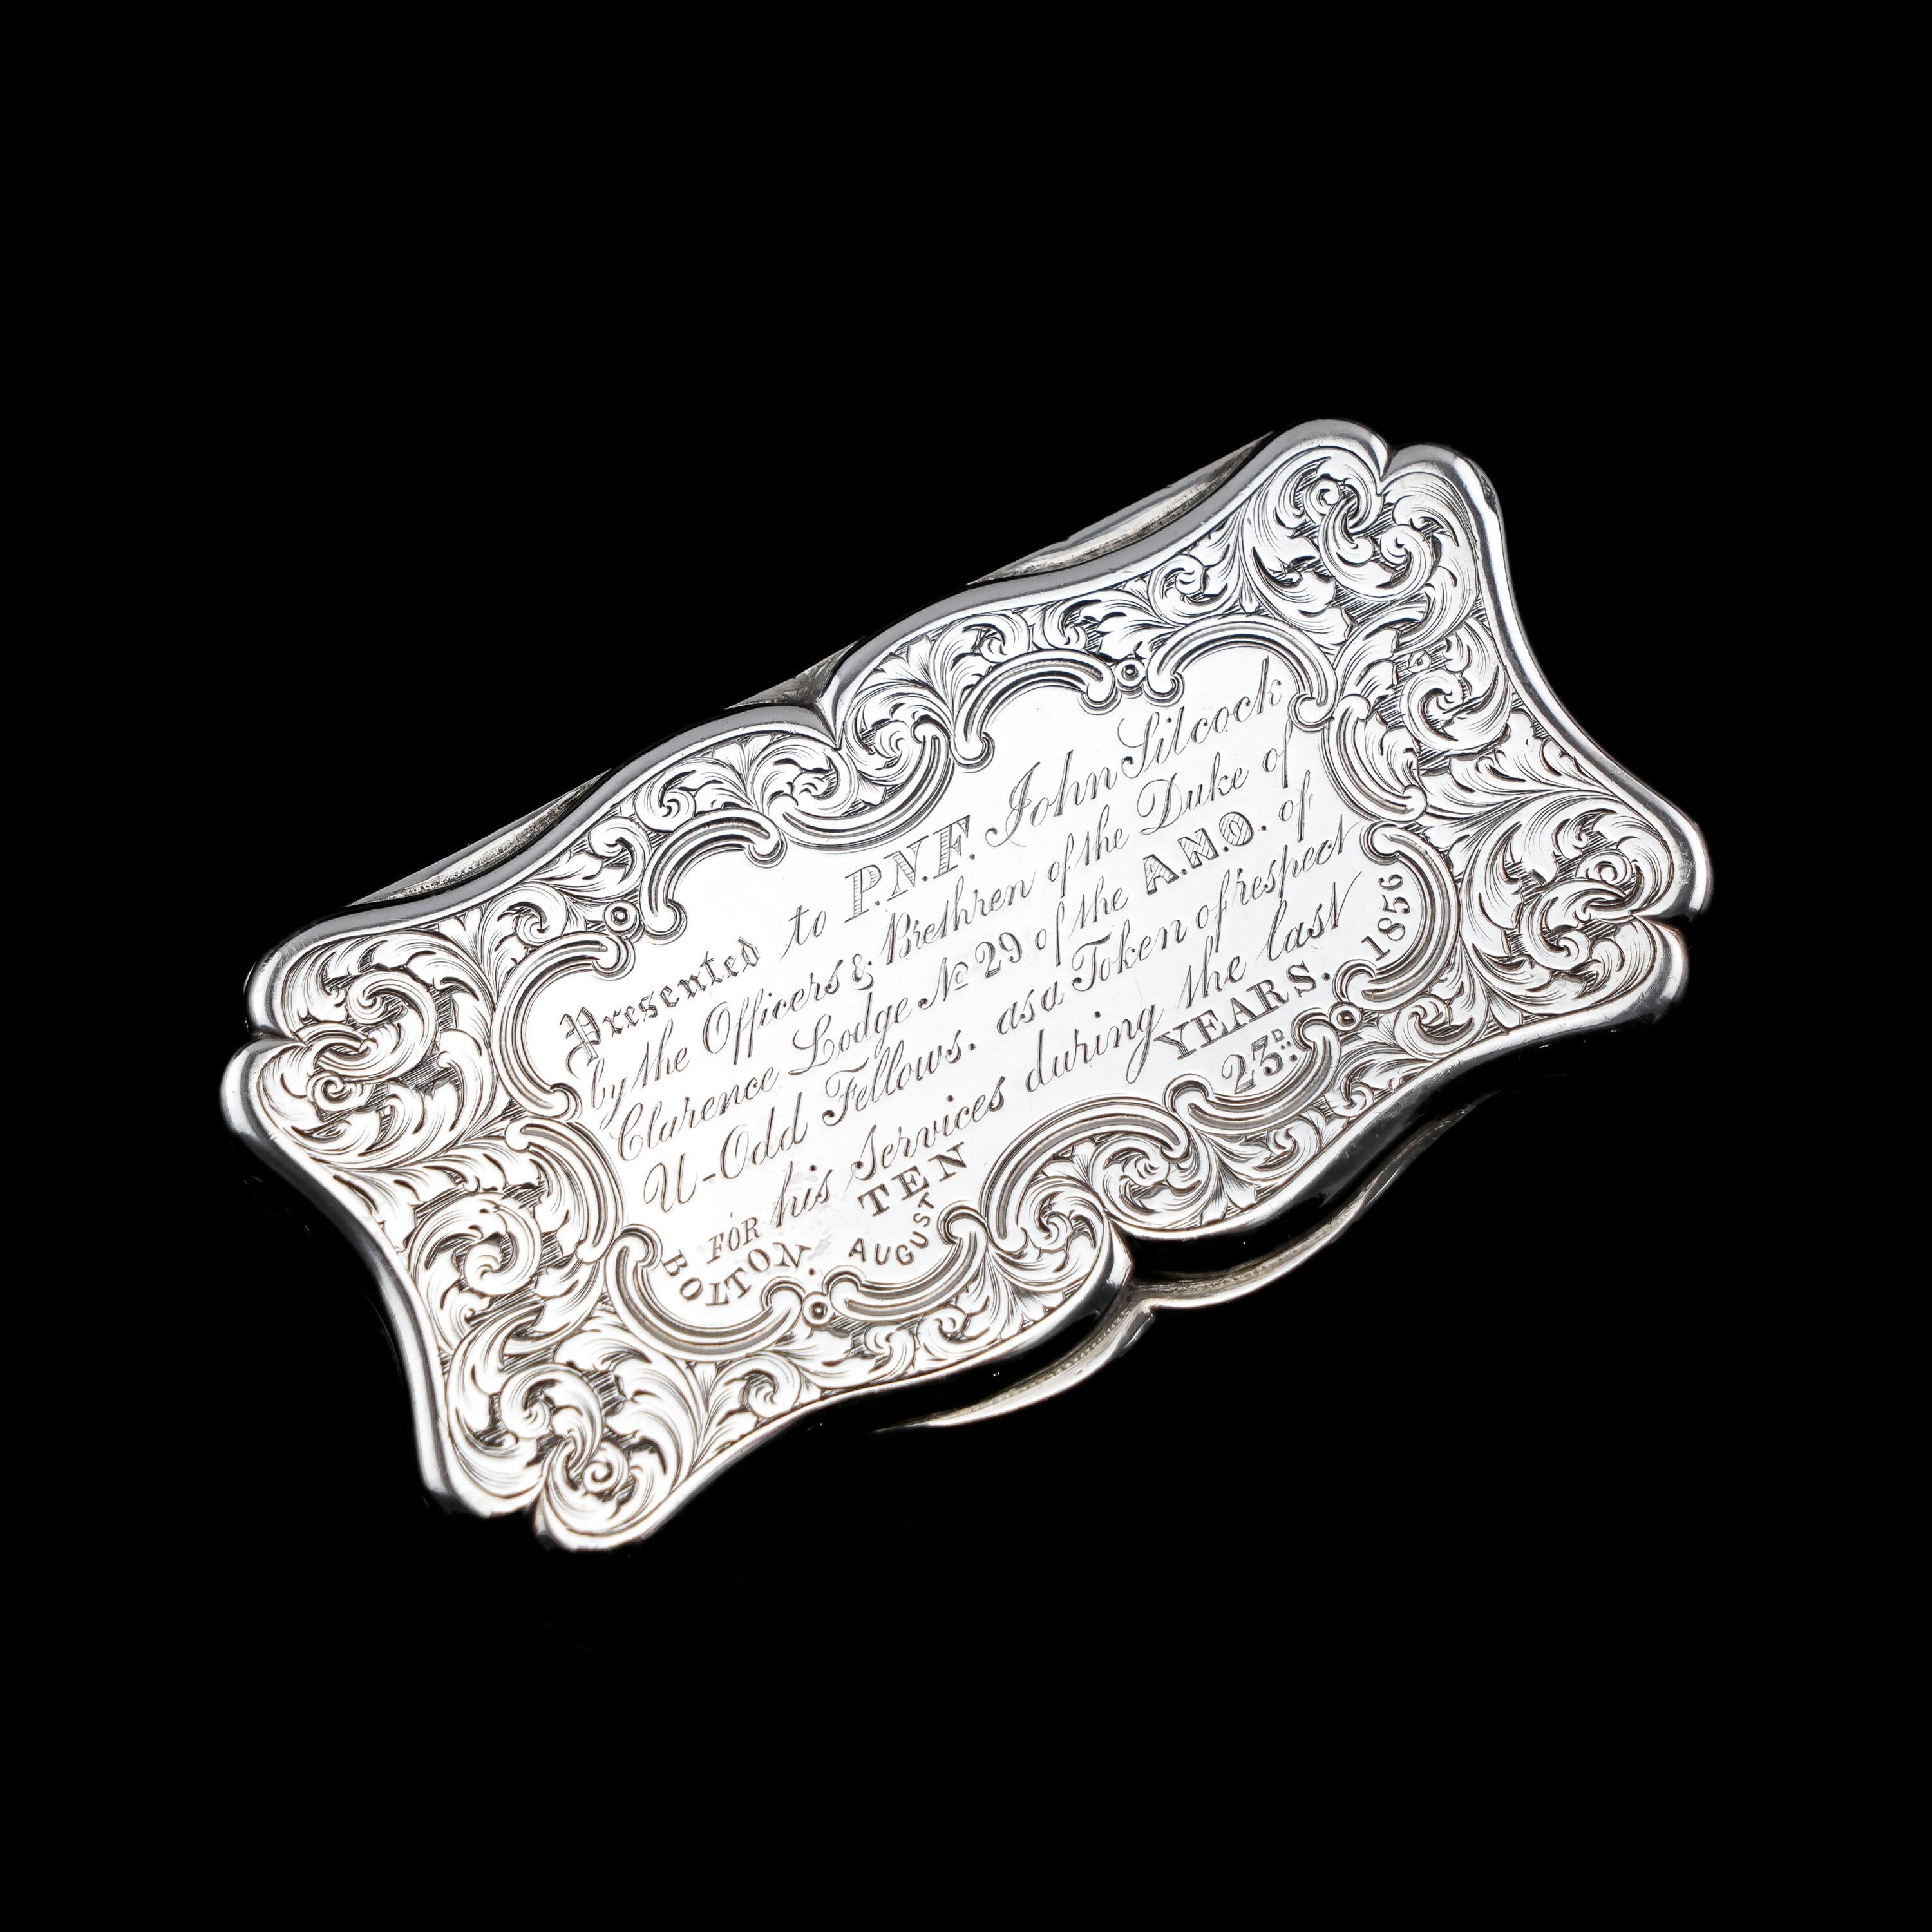 19th Century Antique Victorian Sterling Silver Snuff Box with Fine Engravings - 1850